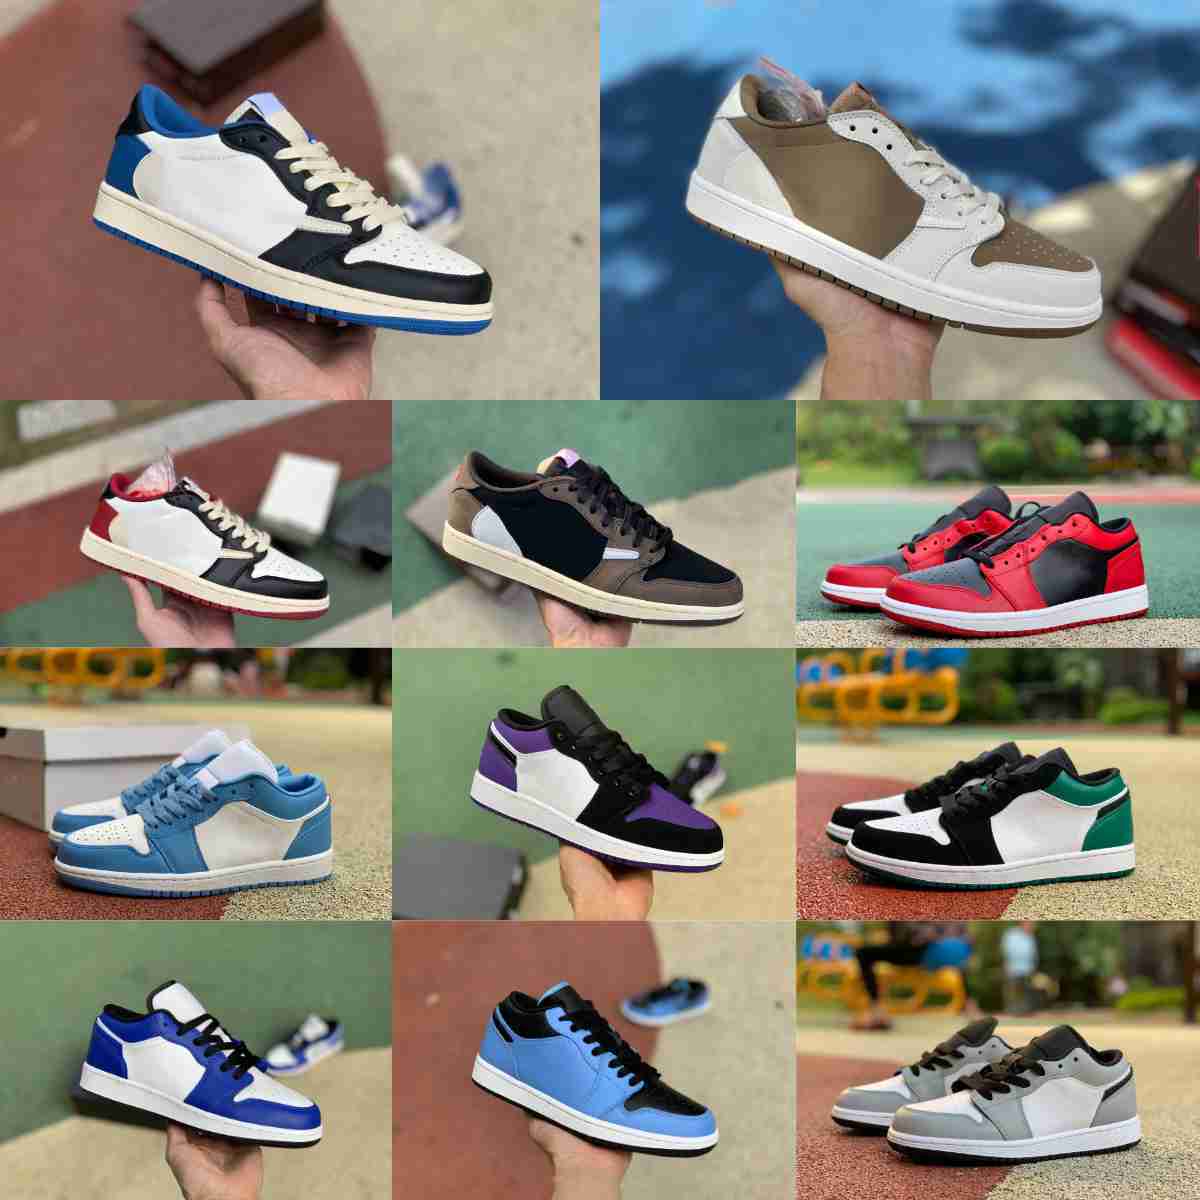 

2023 Fragment TS Jumpman X 1 1S Low Basketball Shoes Court Purple Black Shadow Panda Emerald Crimson Tint White Brown Red Gold Grey Toe UNC Designer Sports Sneakers S18, Please contact us